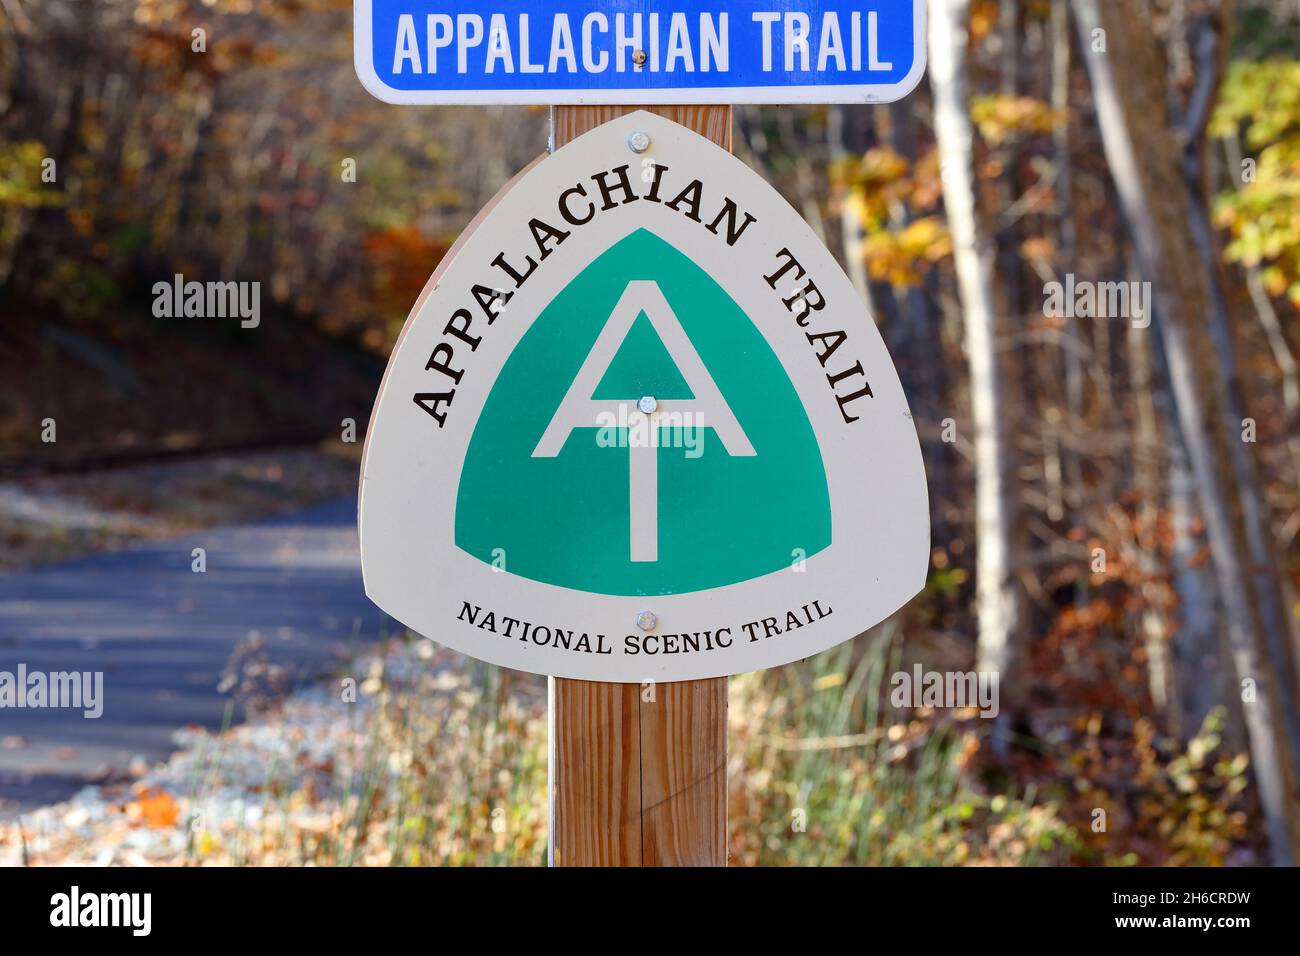 The Appalachian Trail, Appalachian National Scenic Trail signage at a trail head marking the entrance to a long distance multi-state public footpath. Stock Photo